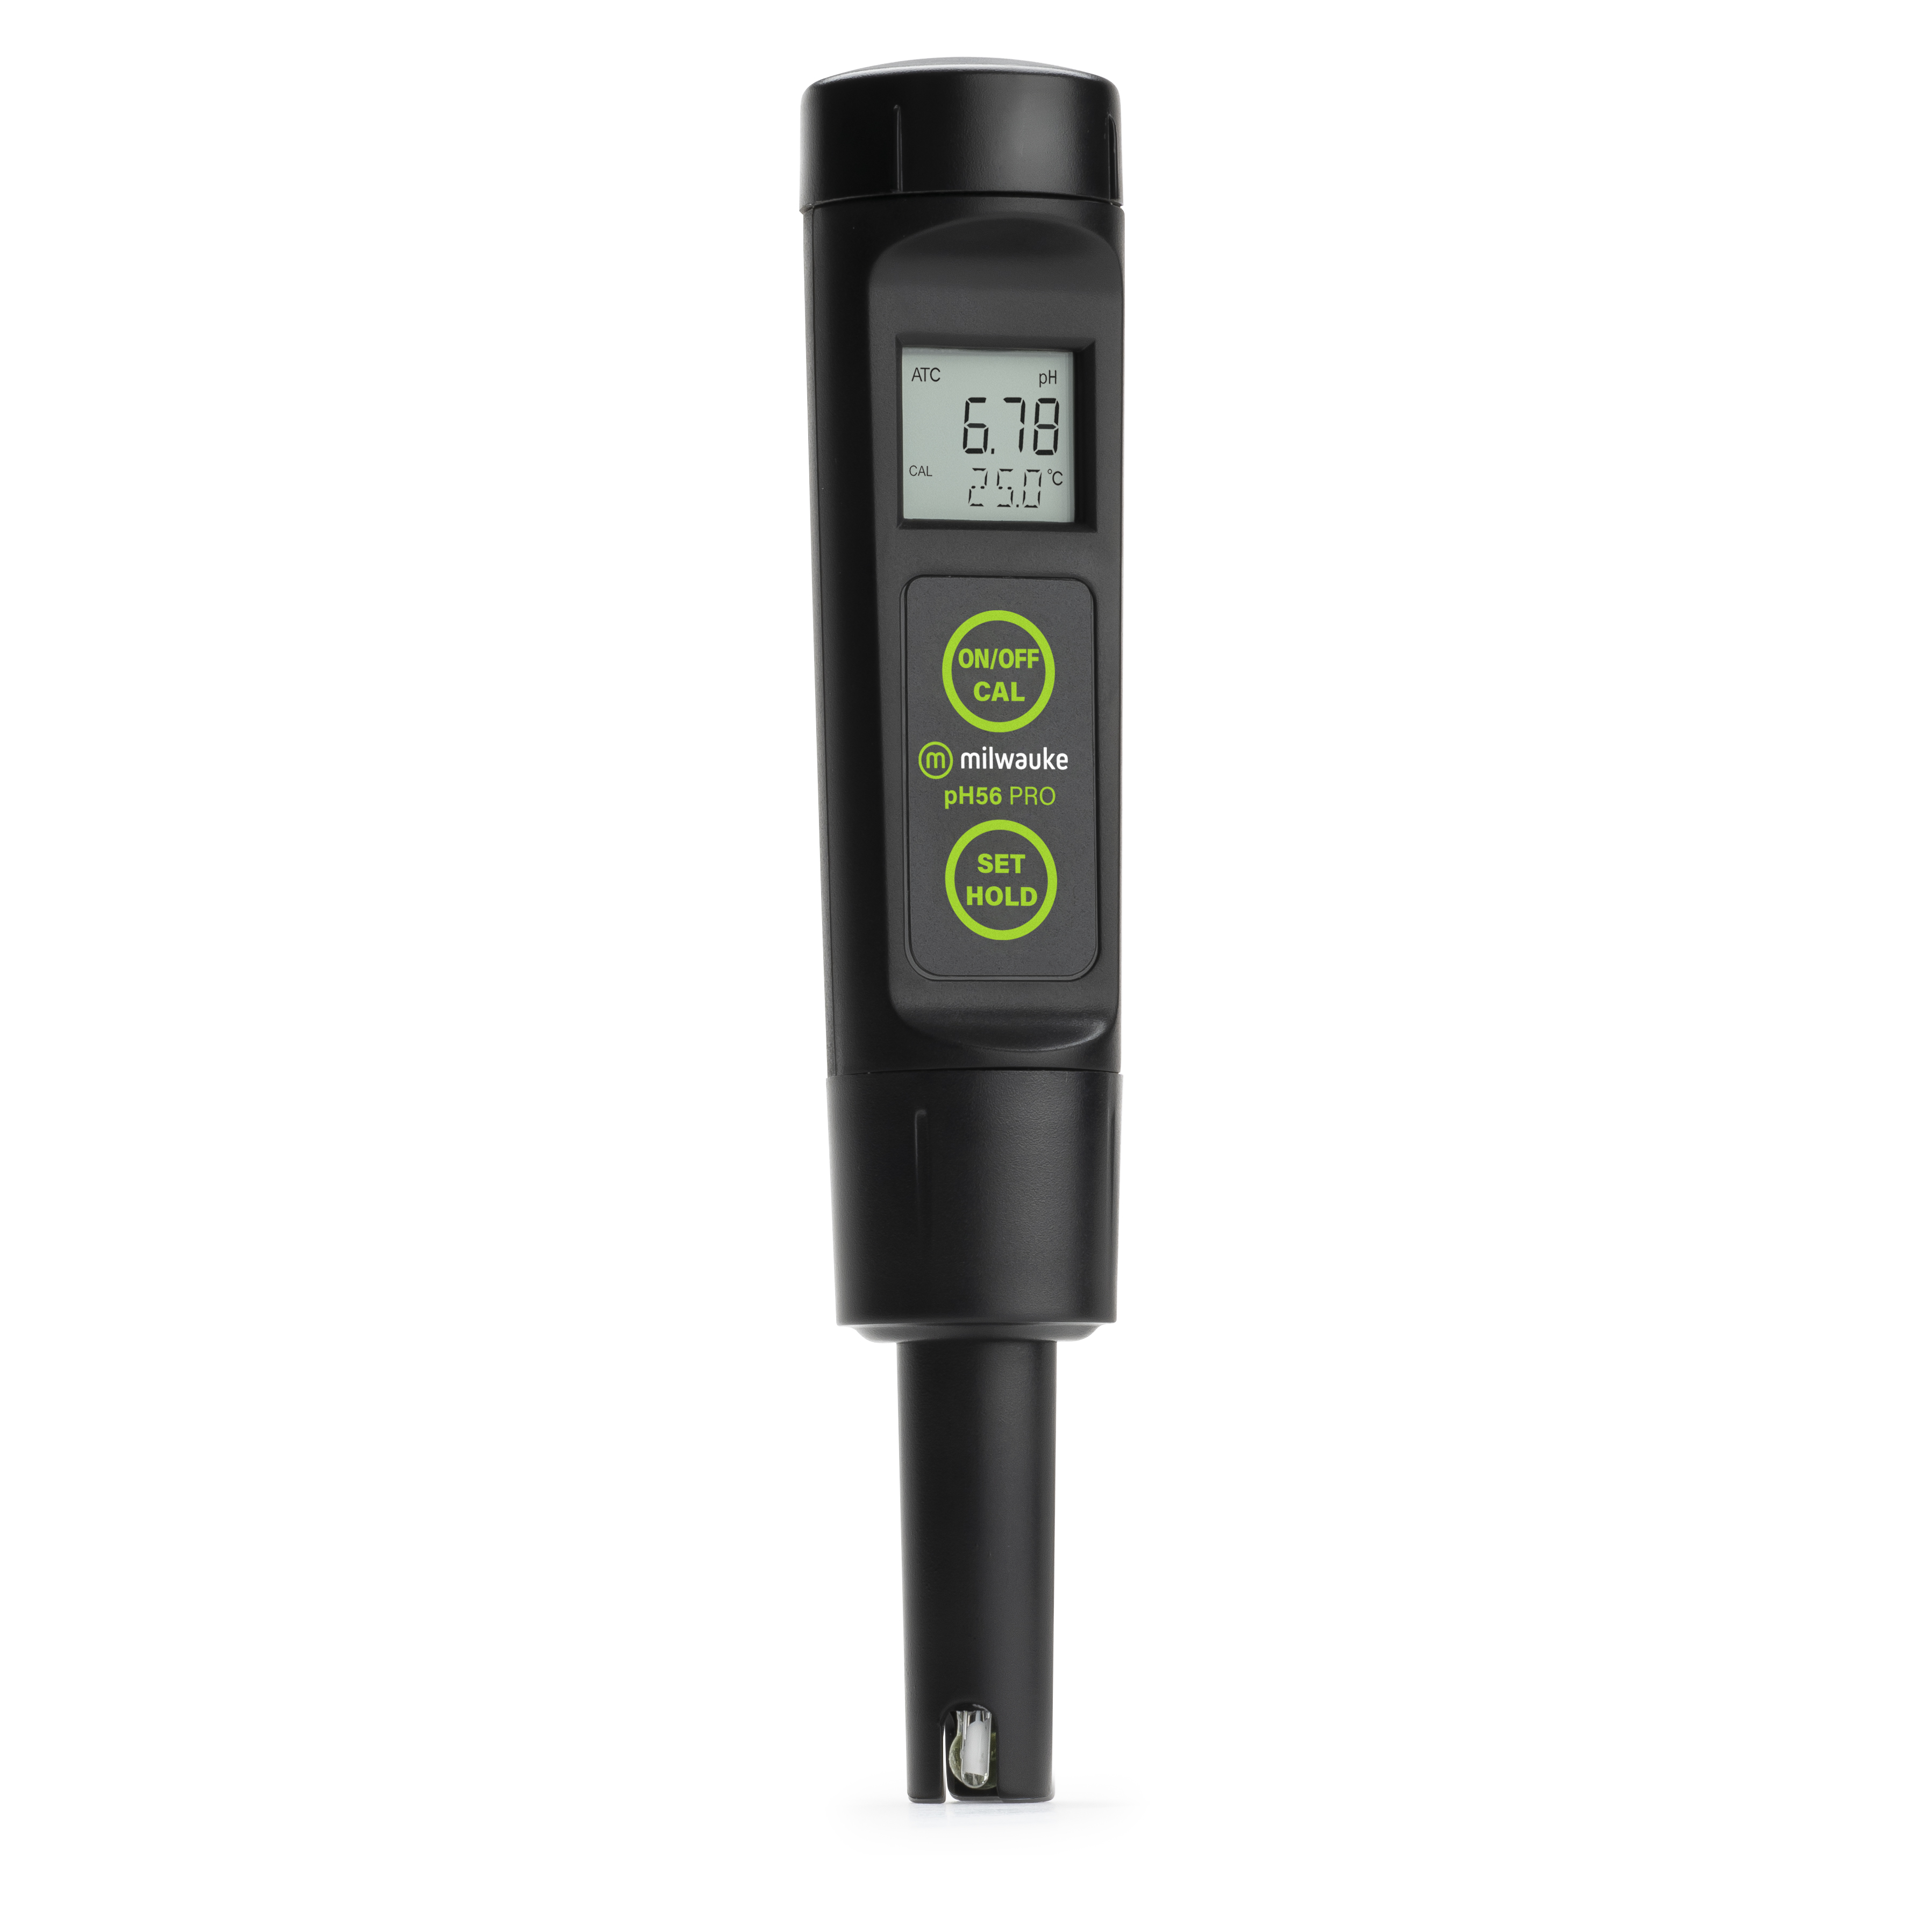 Milwaukee PH56 waterproof pH / Temperature Tester with automatic temperature compensation (ATC) and replaceable probe